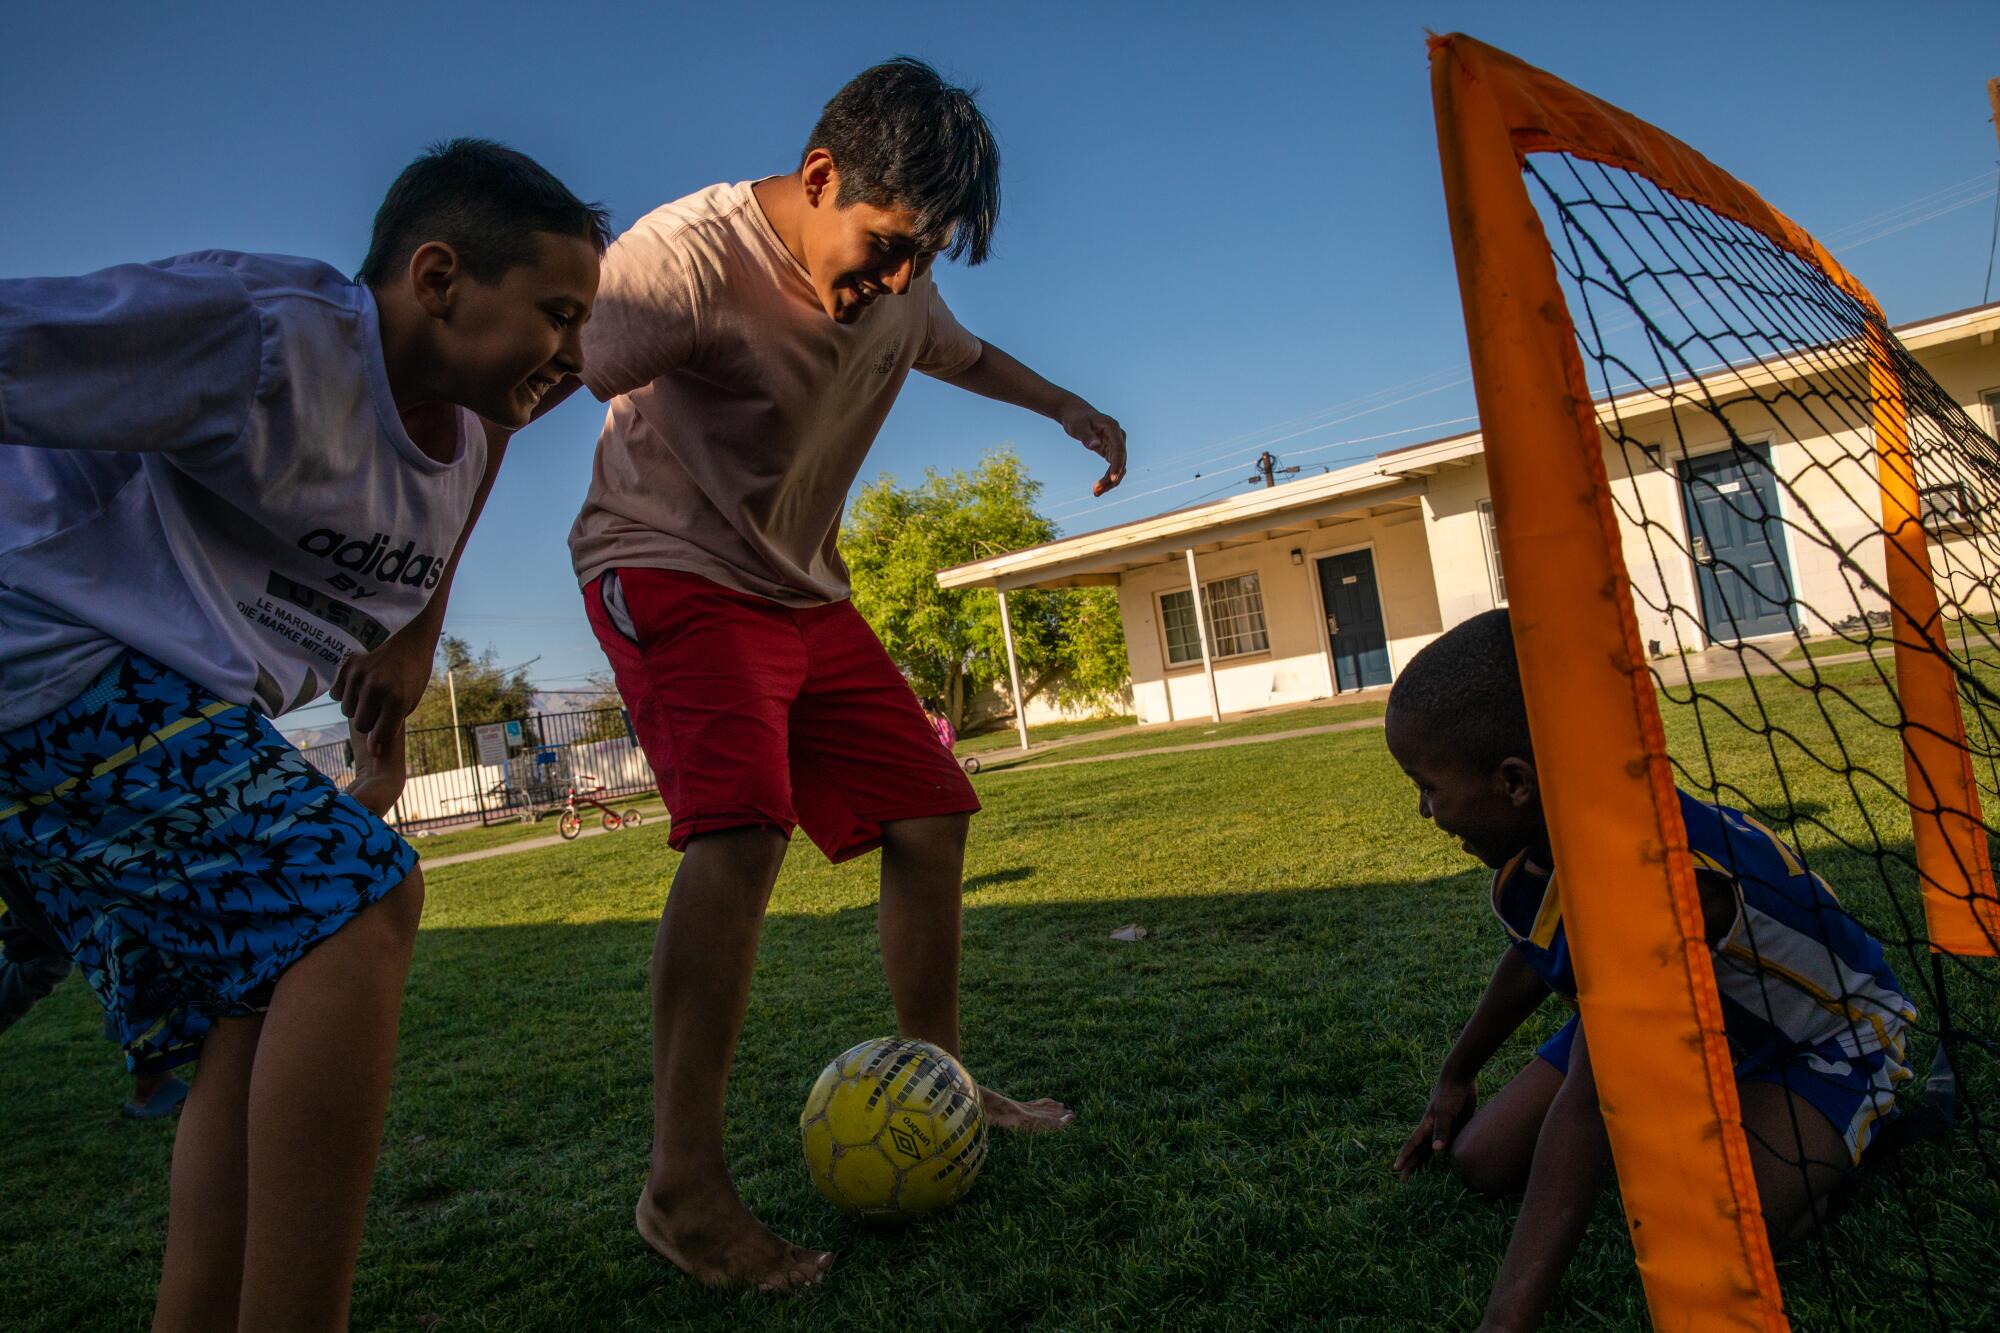 Children of asylum seeking families of different nationalities play soccer at the shelter.